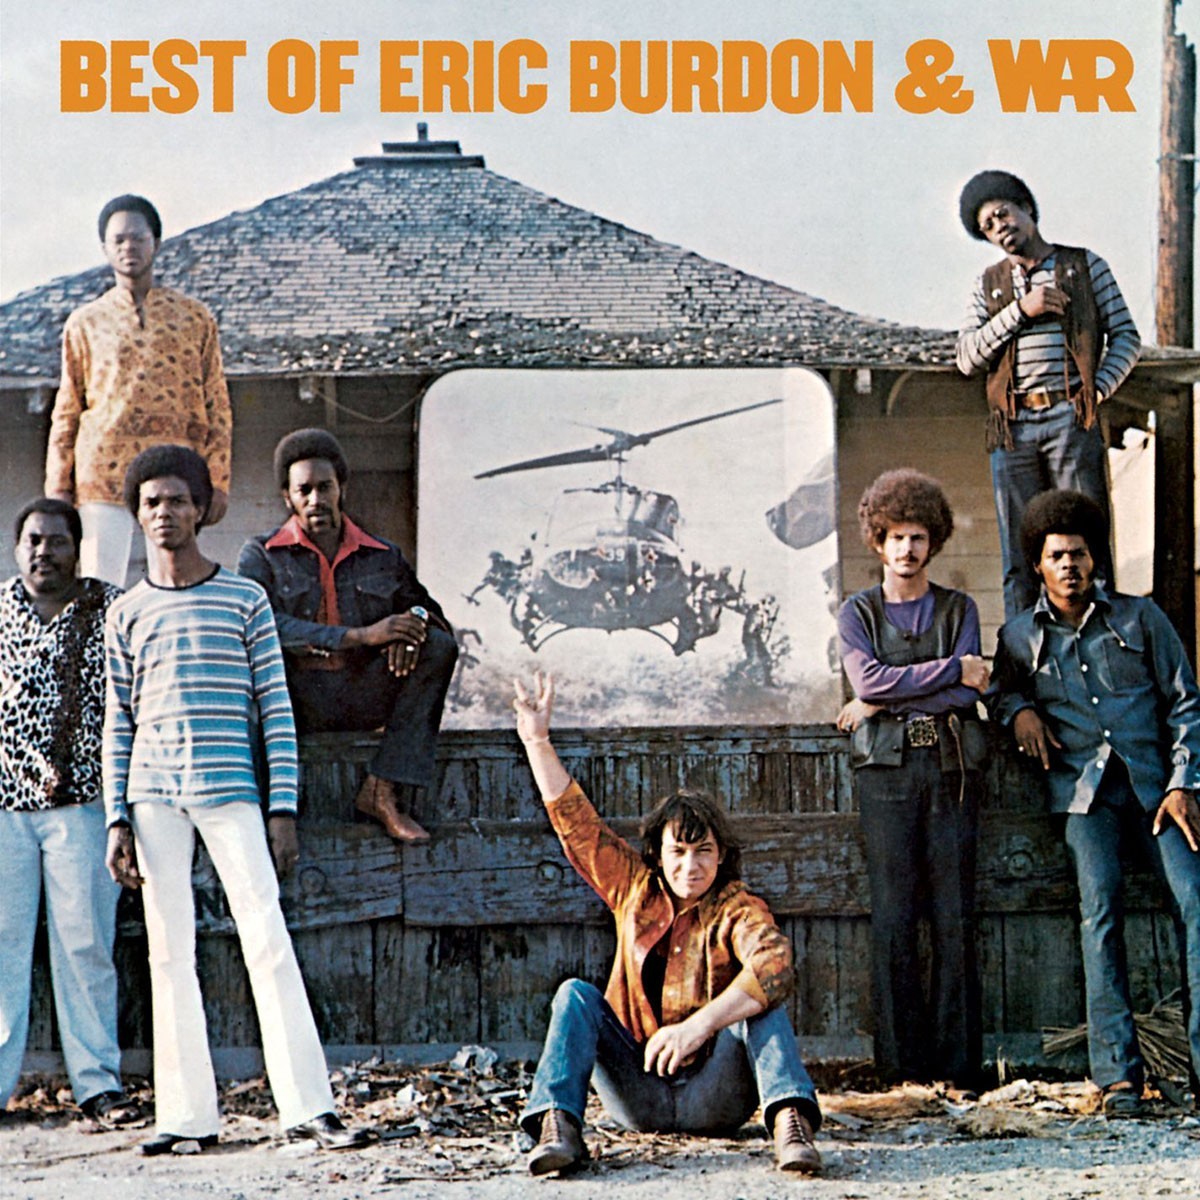 Burdon went in a new direction and released "Eric Burdon and War" in 1969.